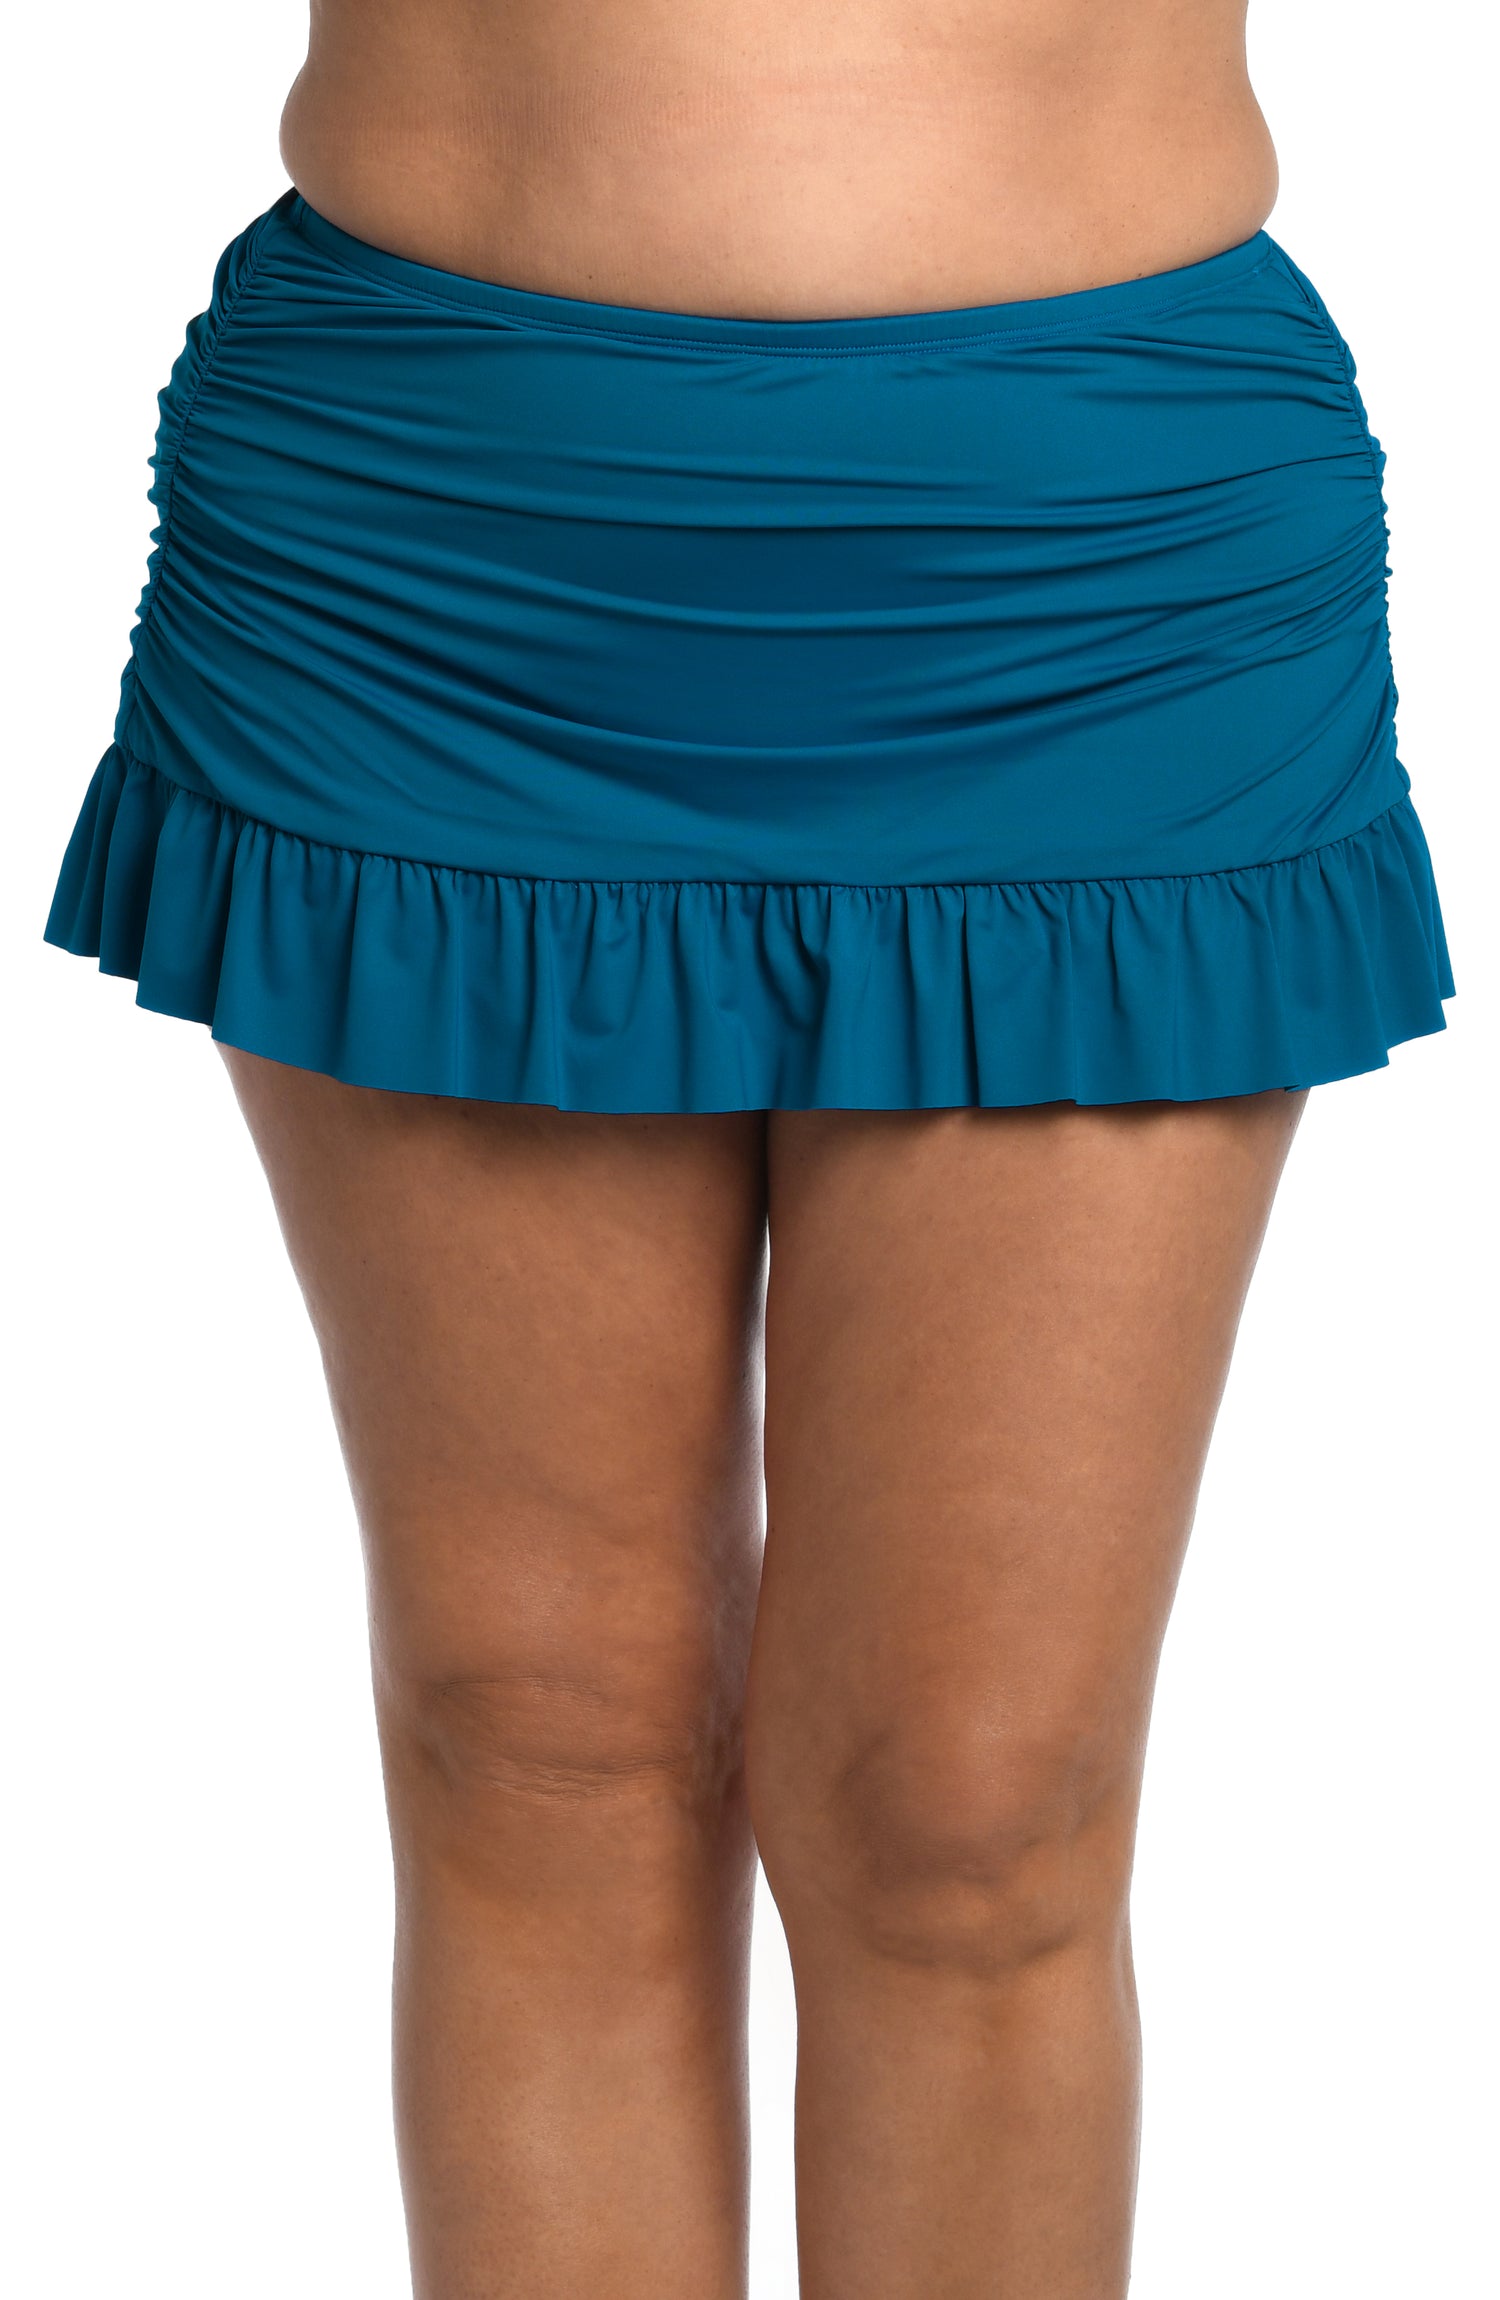 Model is wearing a ocean colored skirted hipster swimsuit bottom from our Best-Selling Island Goddess collection.